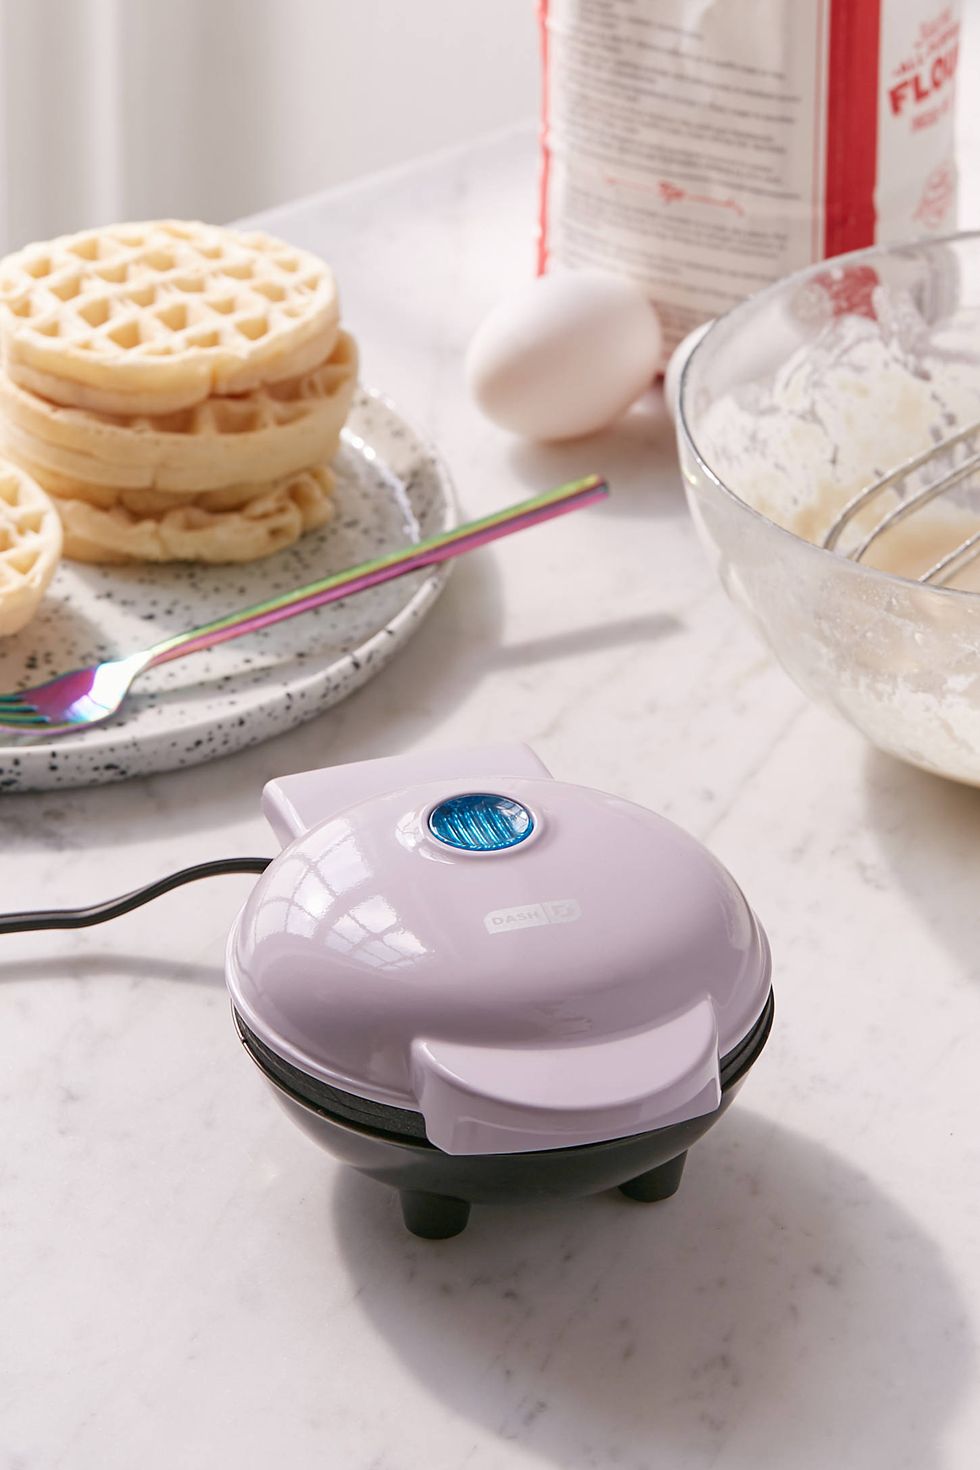 Dash's Mini Waffle Makers and Appliances Are On Sale — Starting at $16